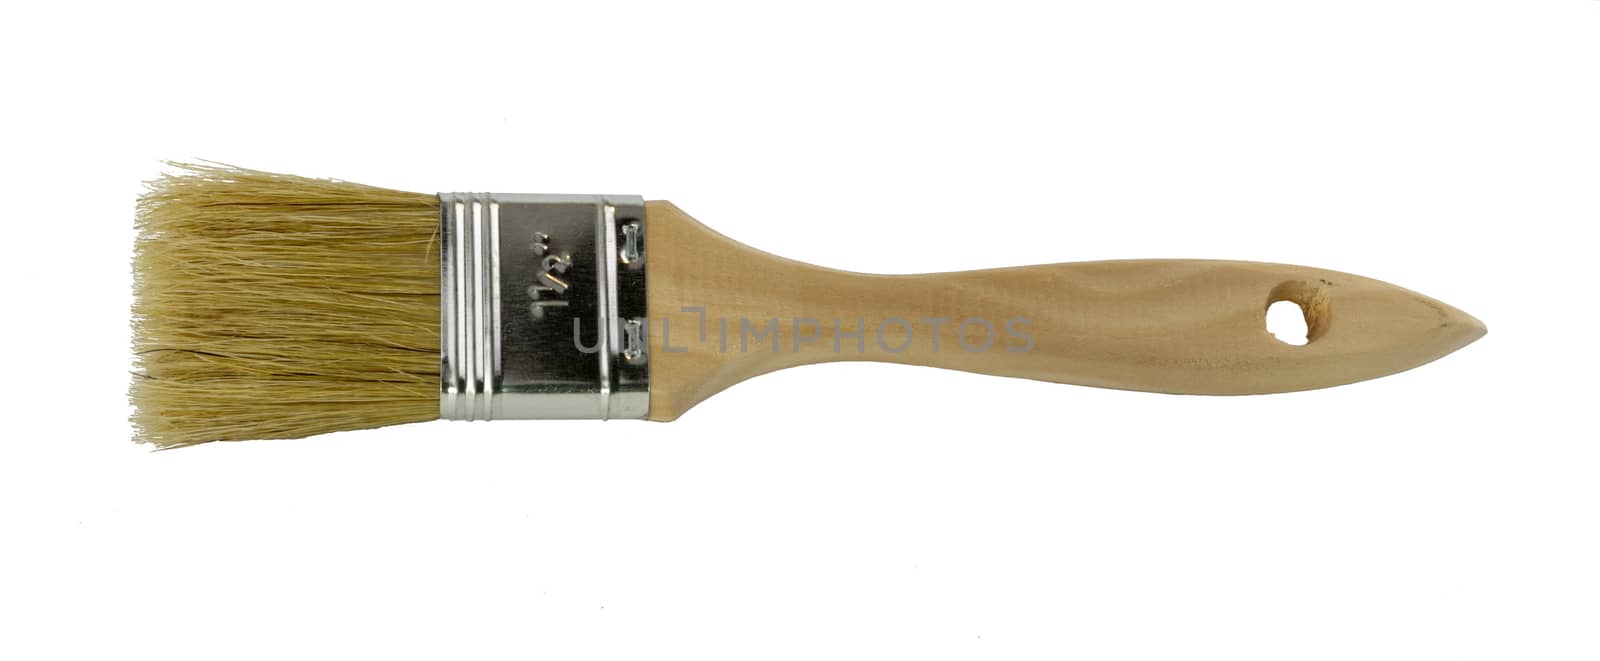 Wooden handled paint brush lying on the side